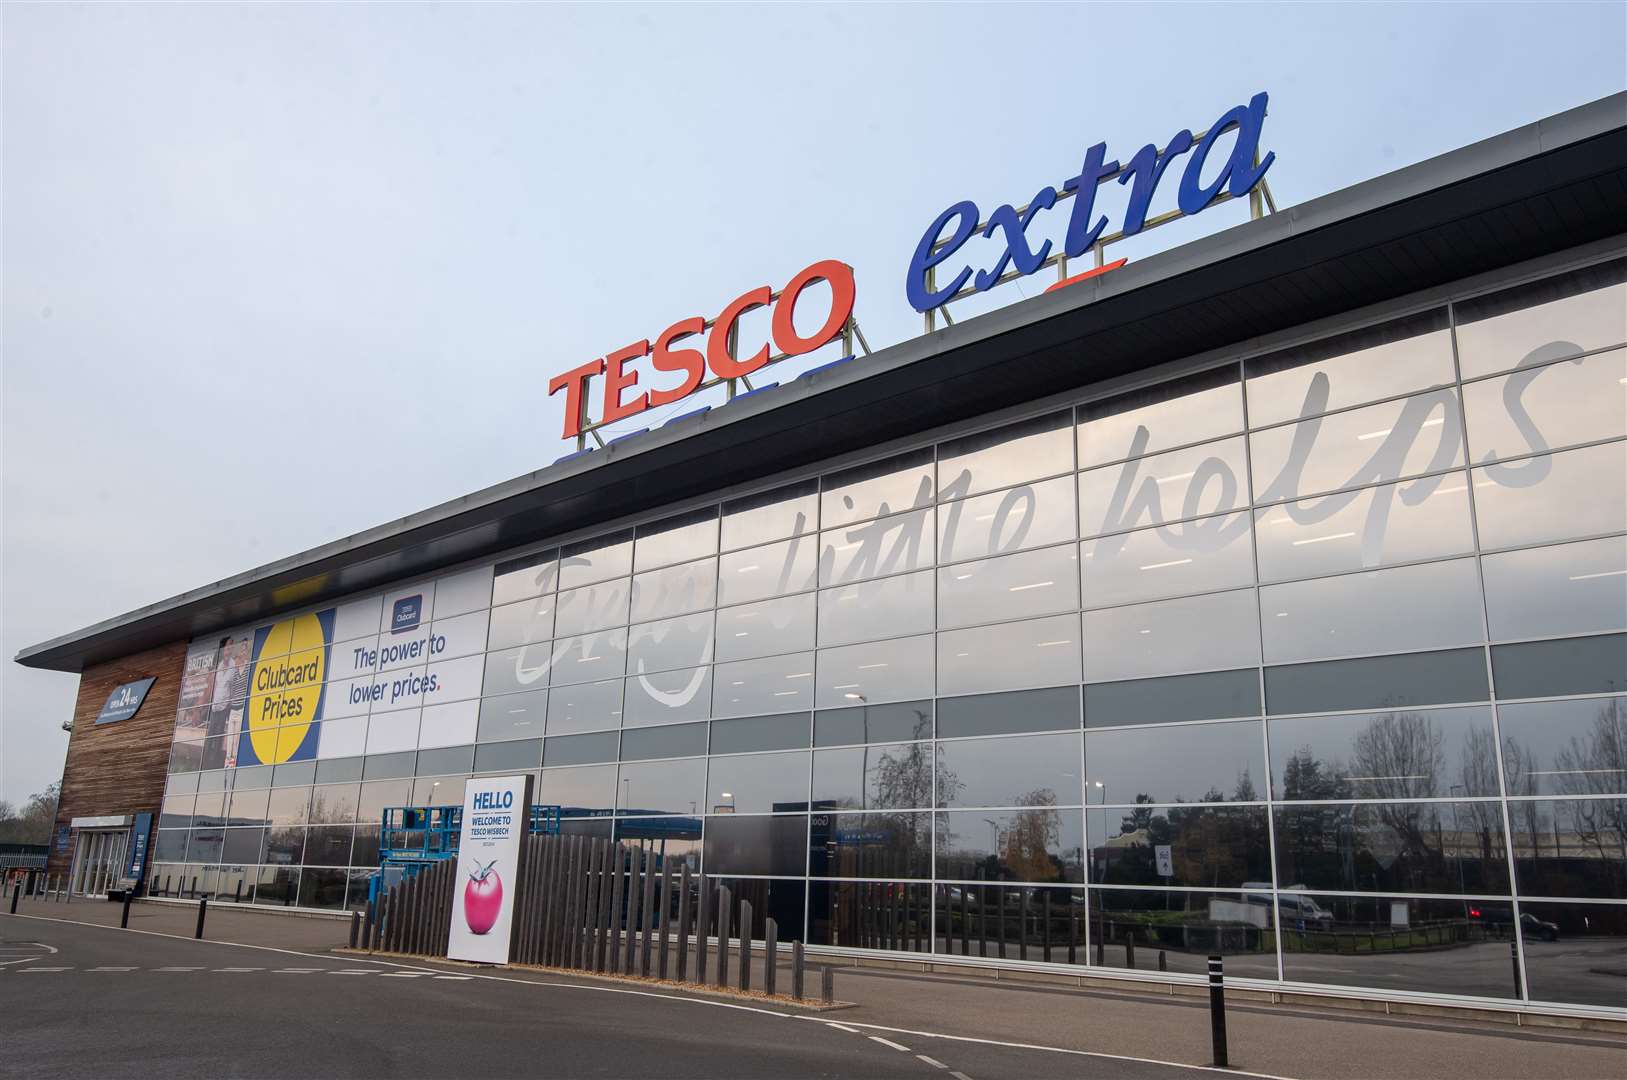 Only a small proportion of Tesco orders due for delivery on Saturday were impacted, it is understood (Joe Giddens/PA)